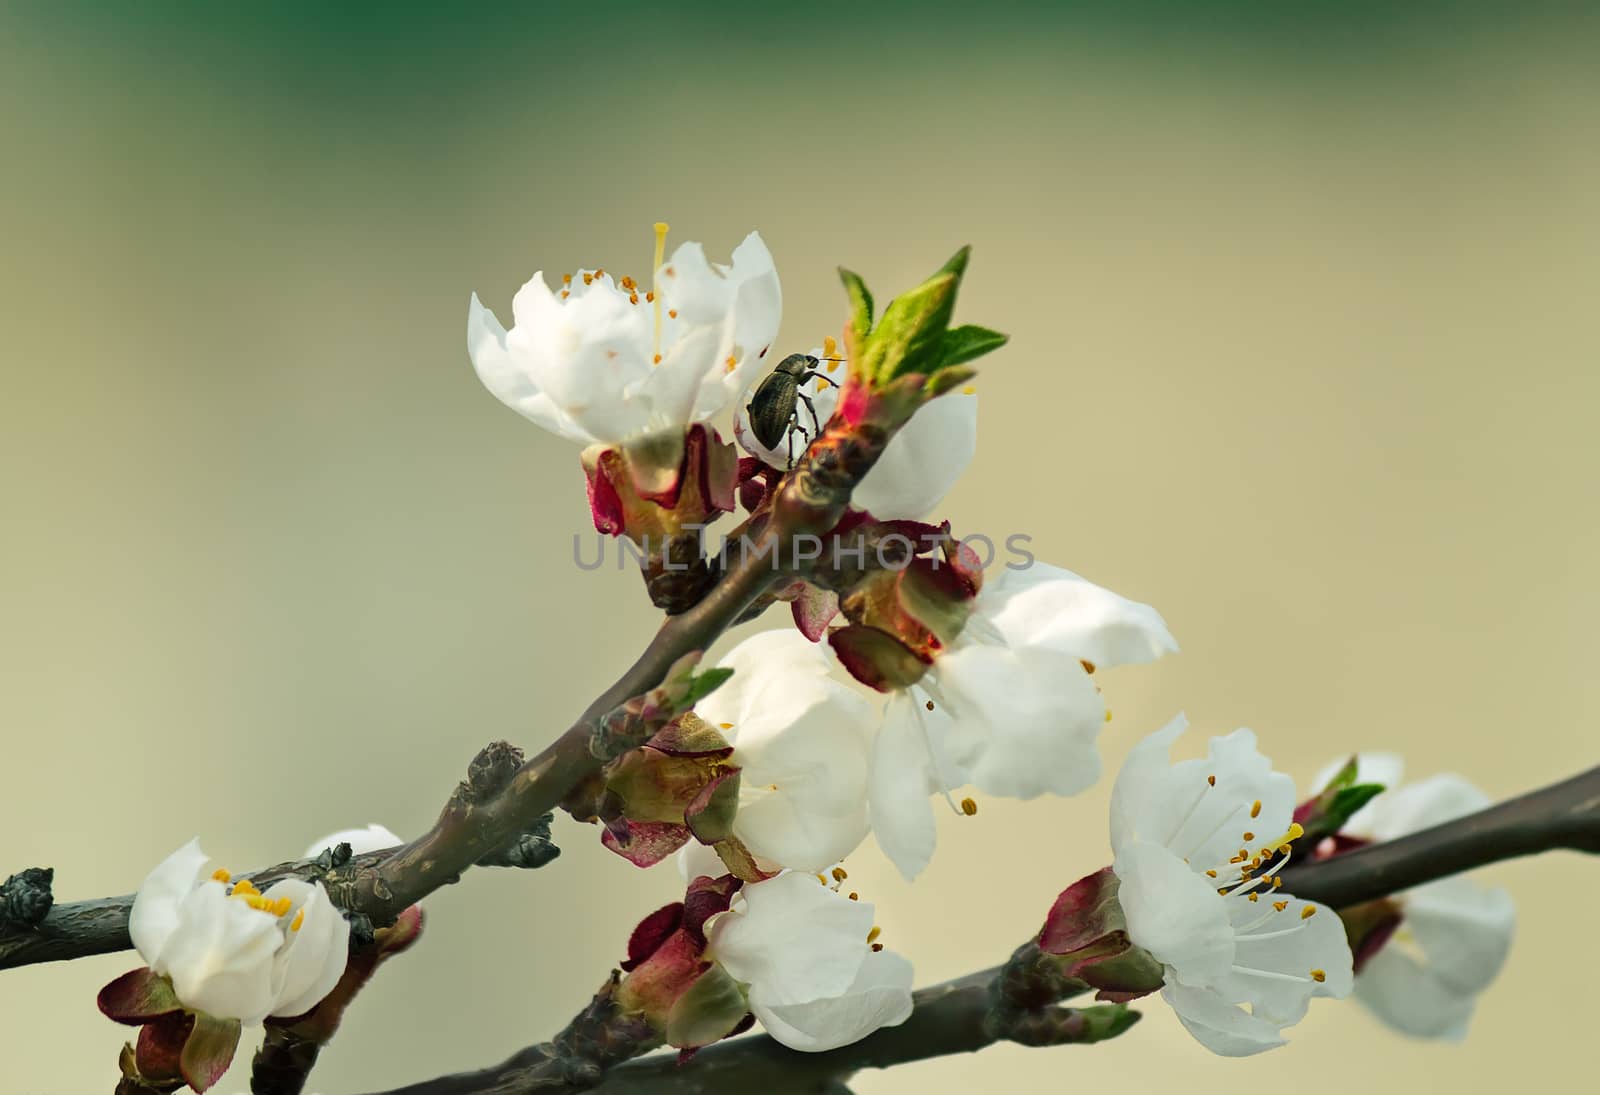 Blooming apricot and insect in the sky by georgina198